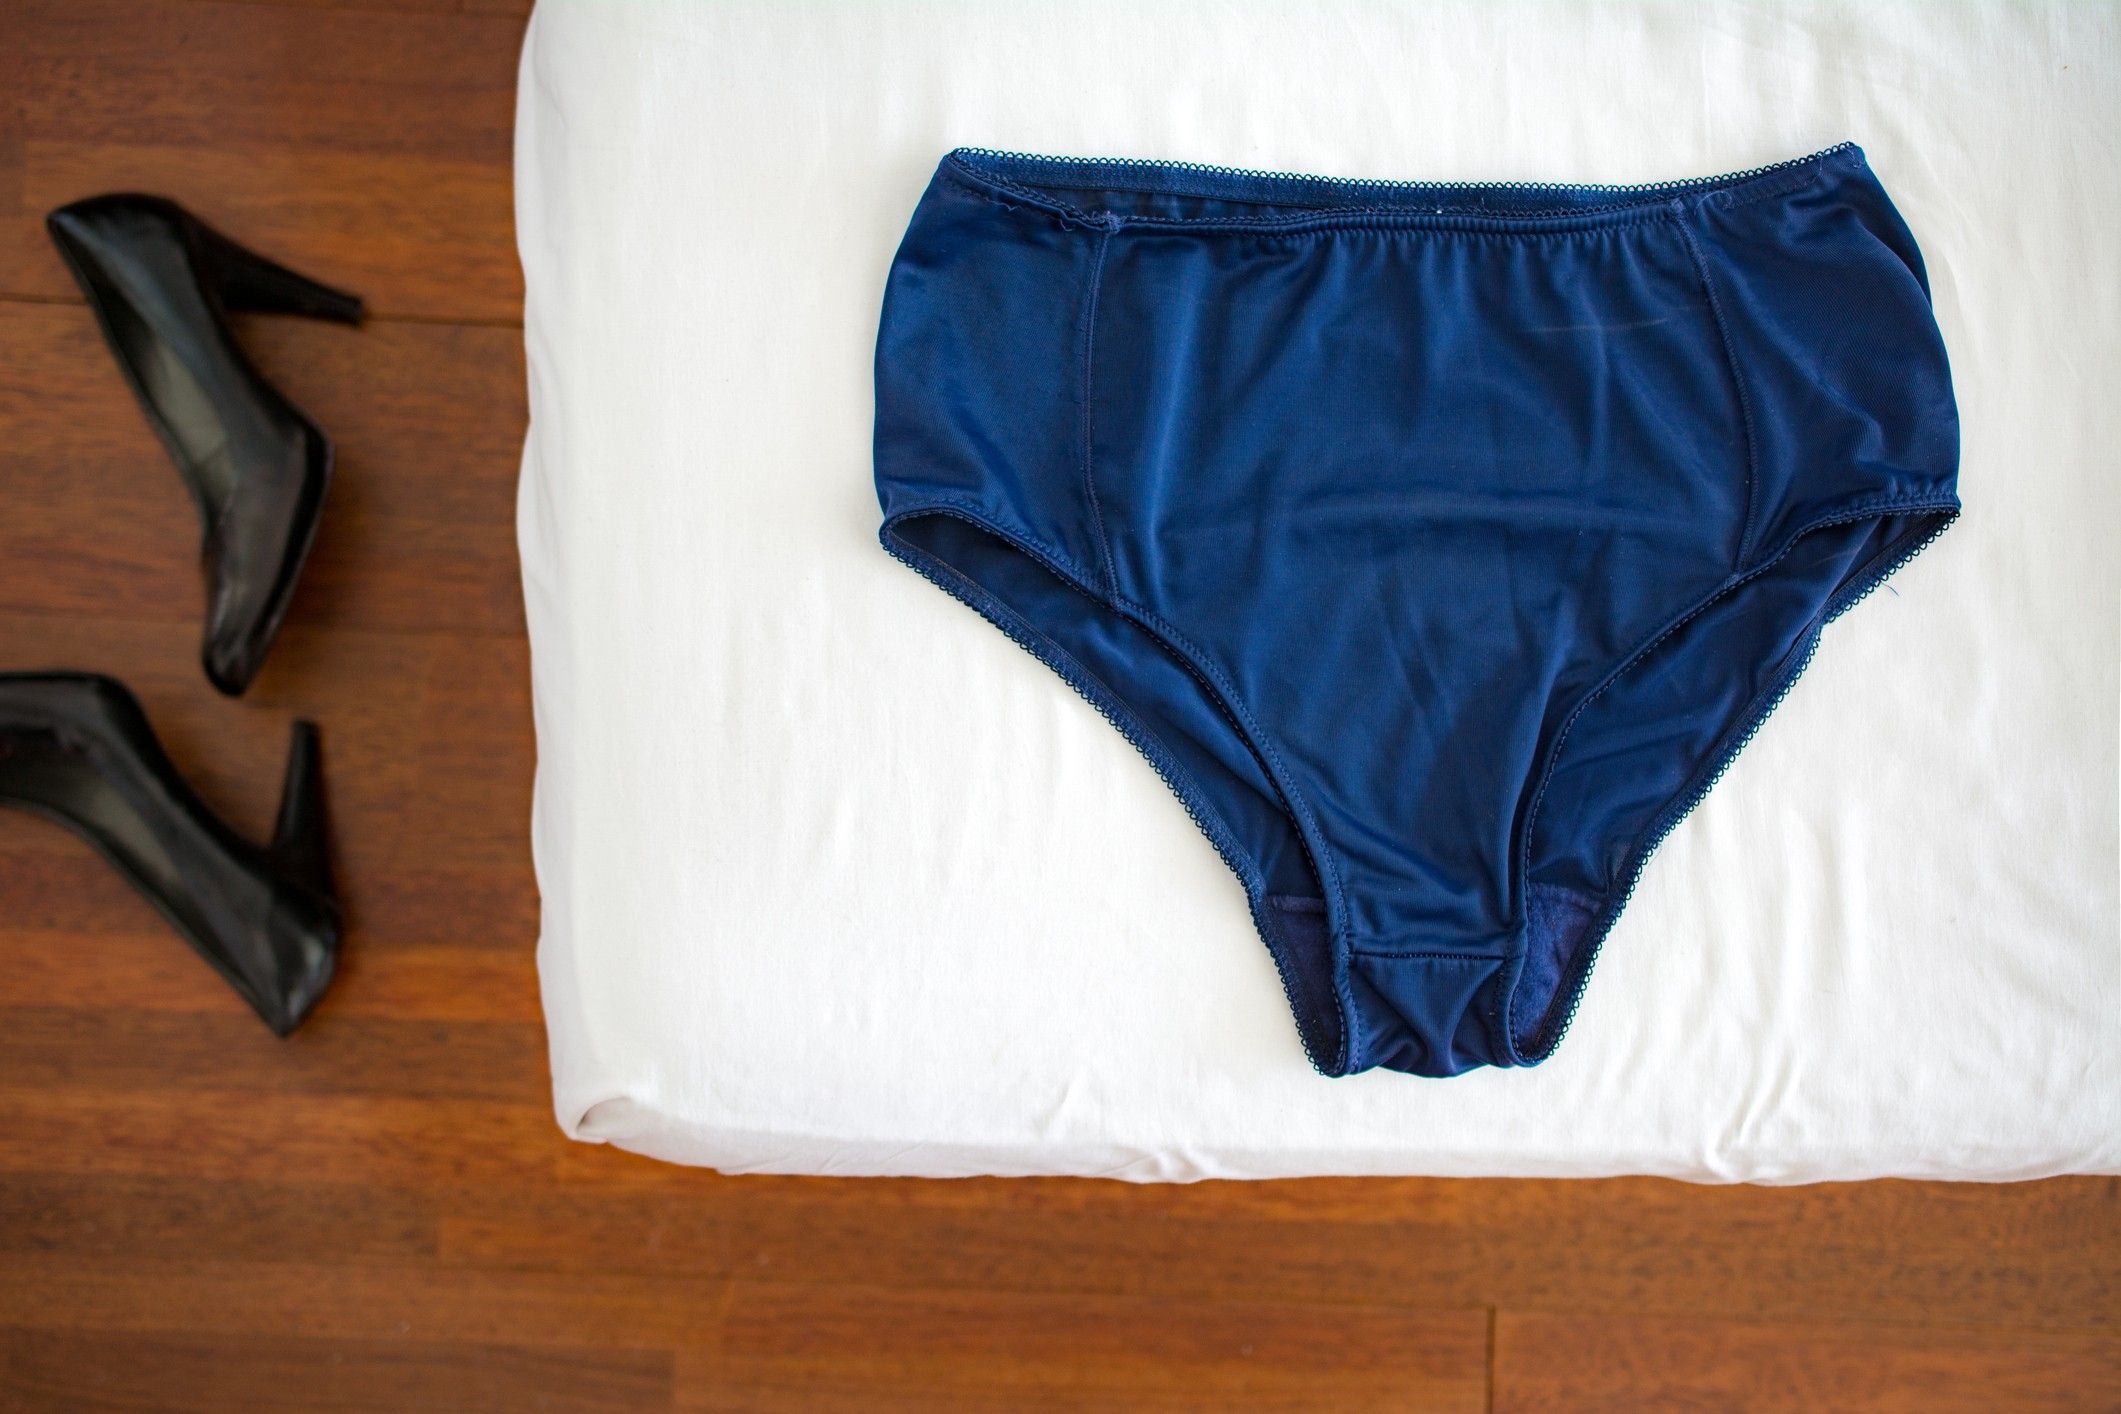 10 Women On Why They Stopped Wearing Panties Underwear picture